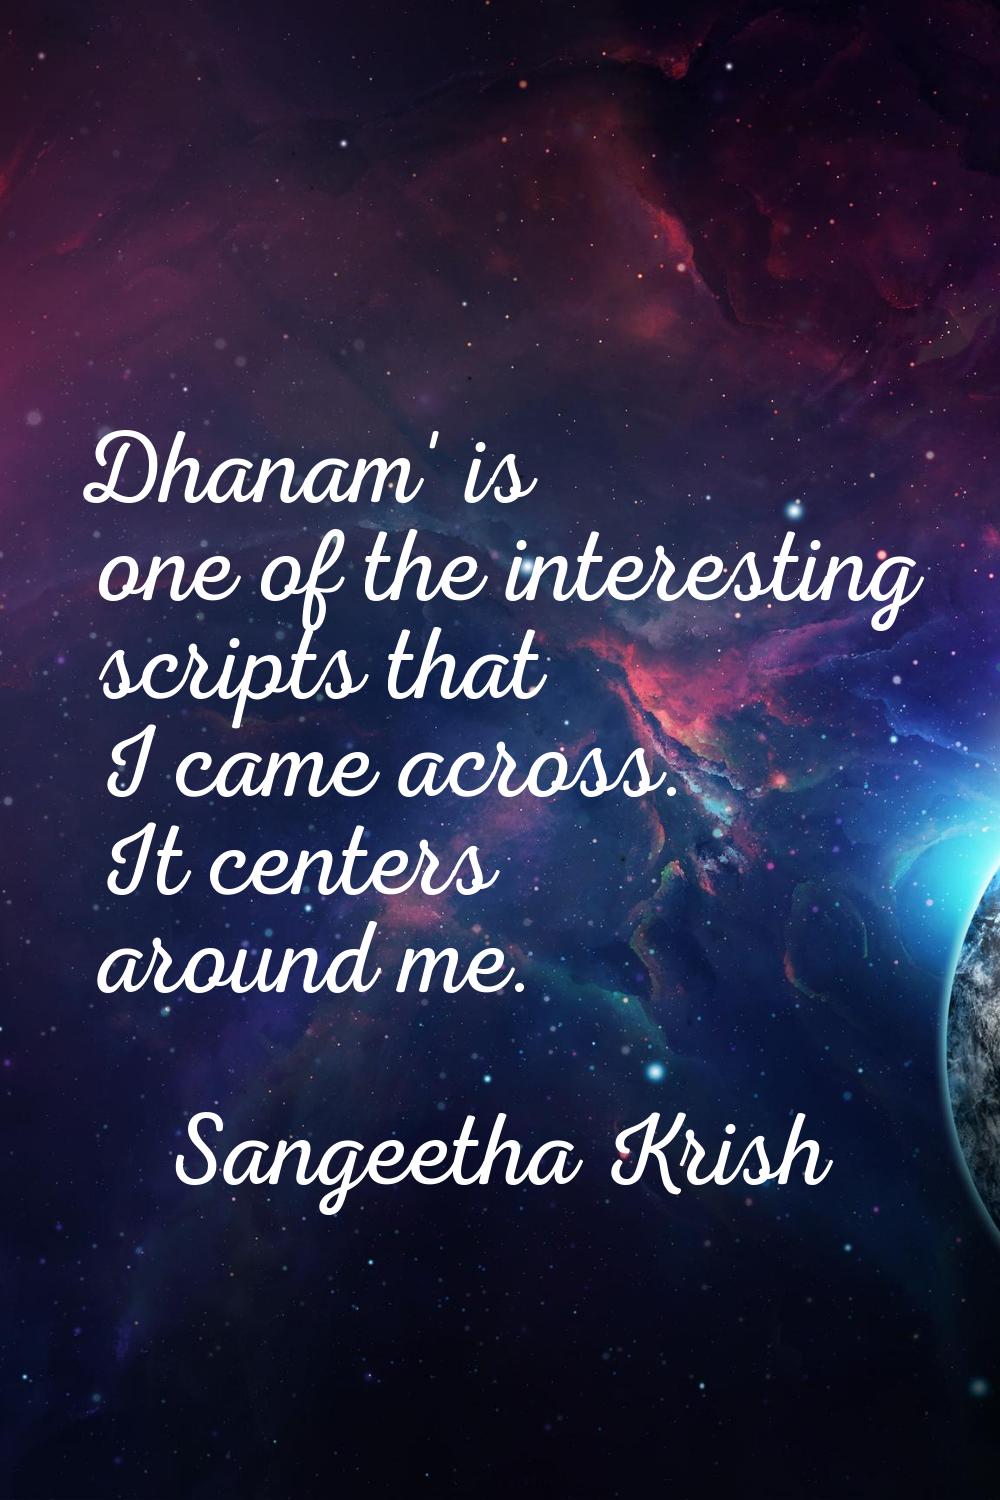 Dhanam' is one of the interesting scripts that I came across. It centers around me.